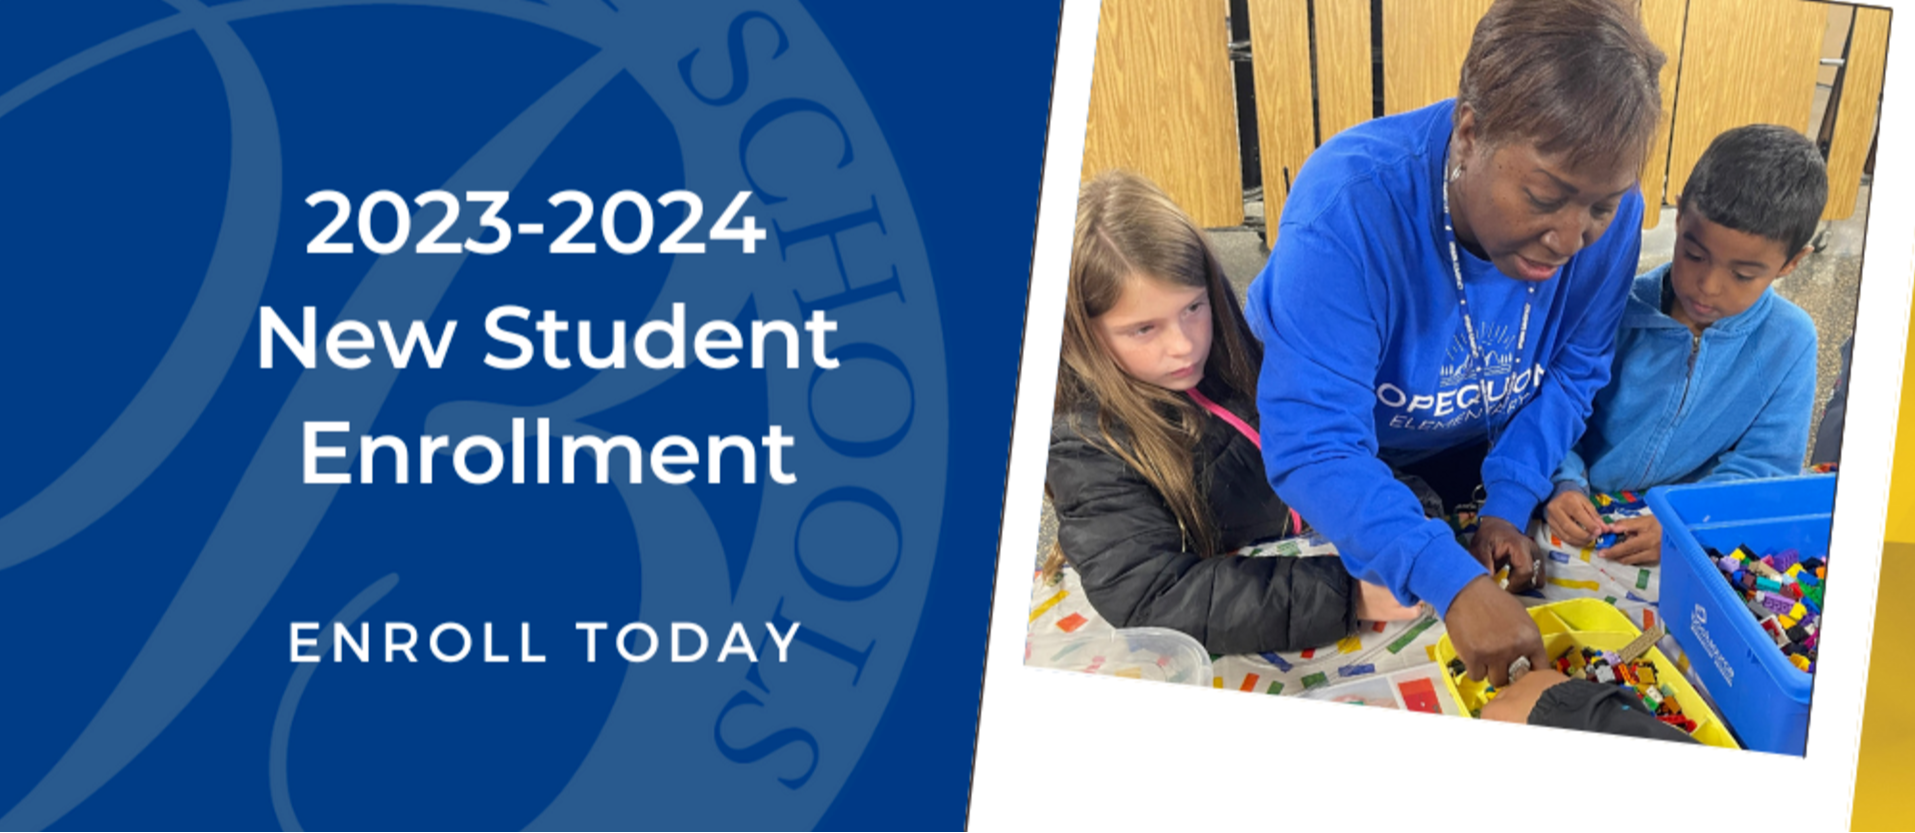 image of 2023-2024 new student enrollment template with image of teacher interacting with students